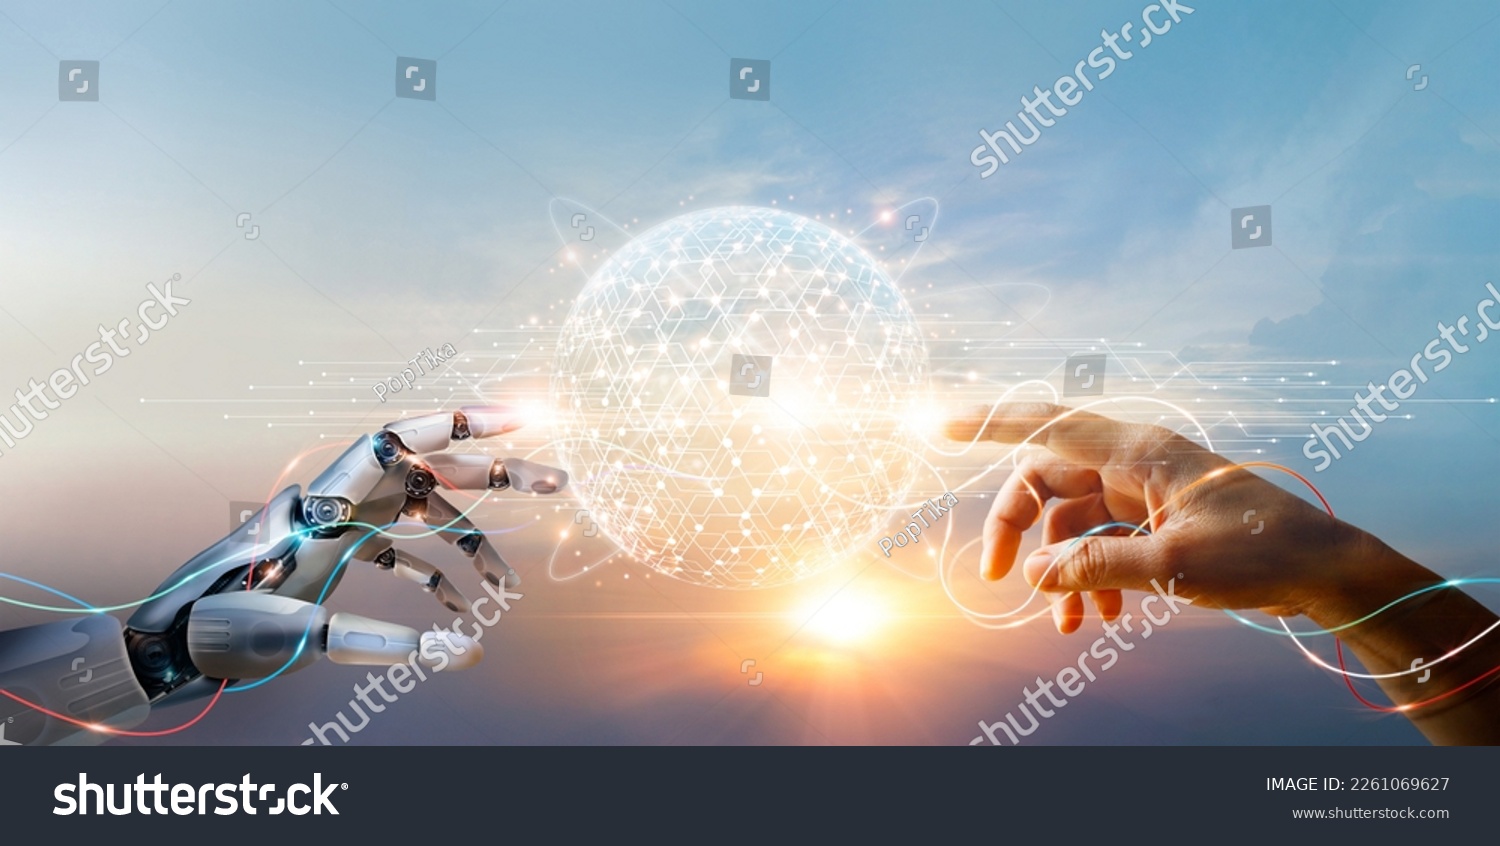 AI, Machine learning, Hands of robot and human touching big data of Global network connection, Internet and digital technology, Science and artificial intelligence digital technologies of futuristic. #2261069627